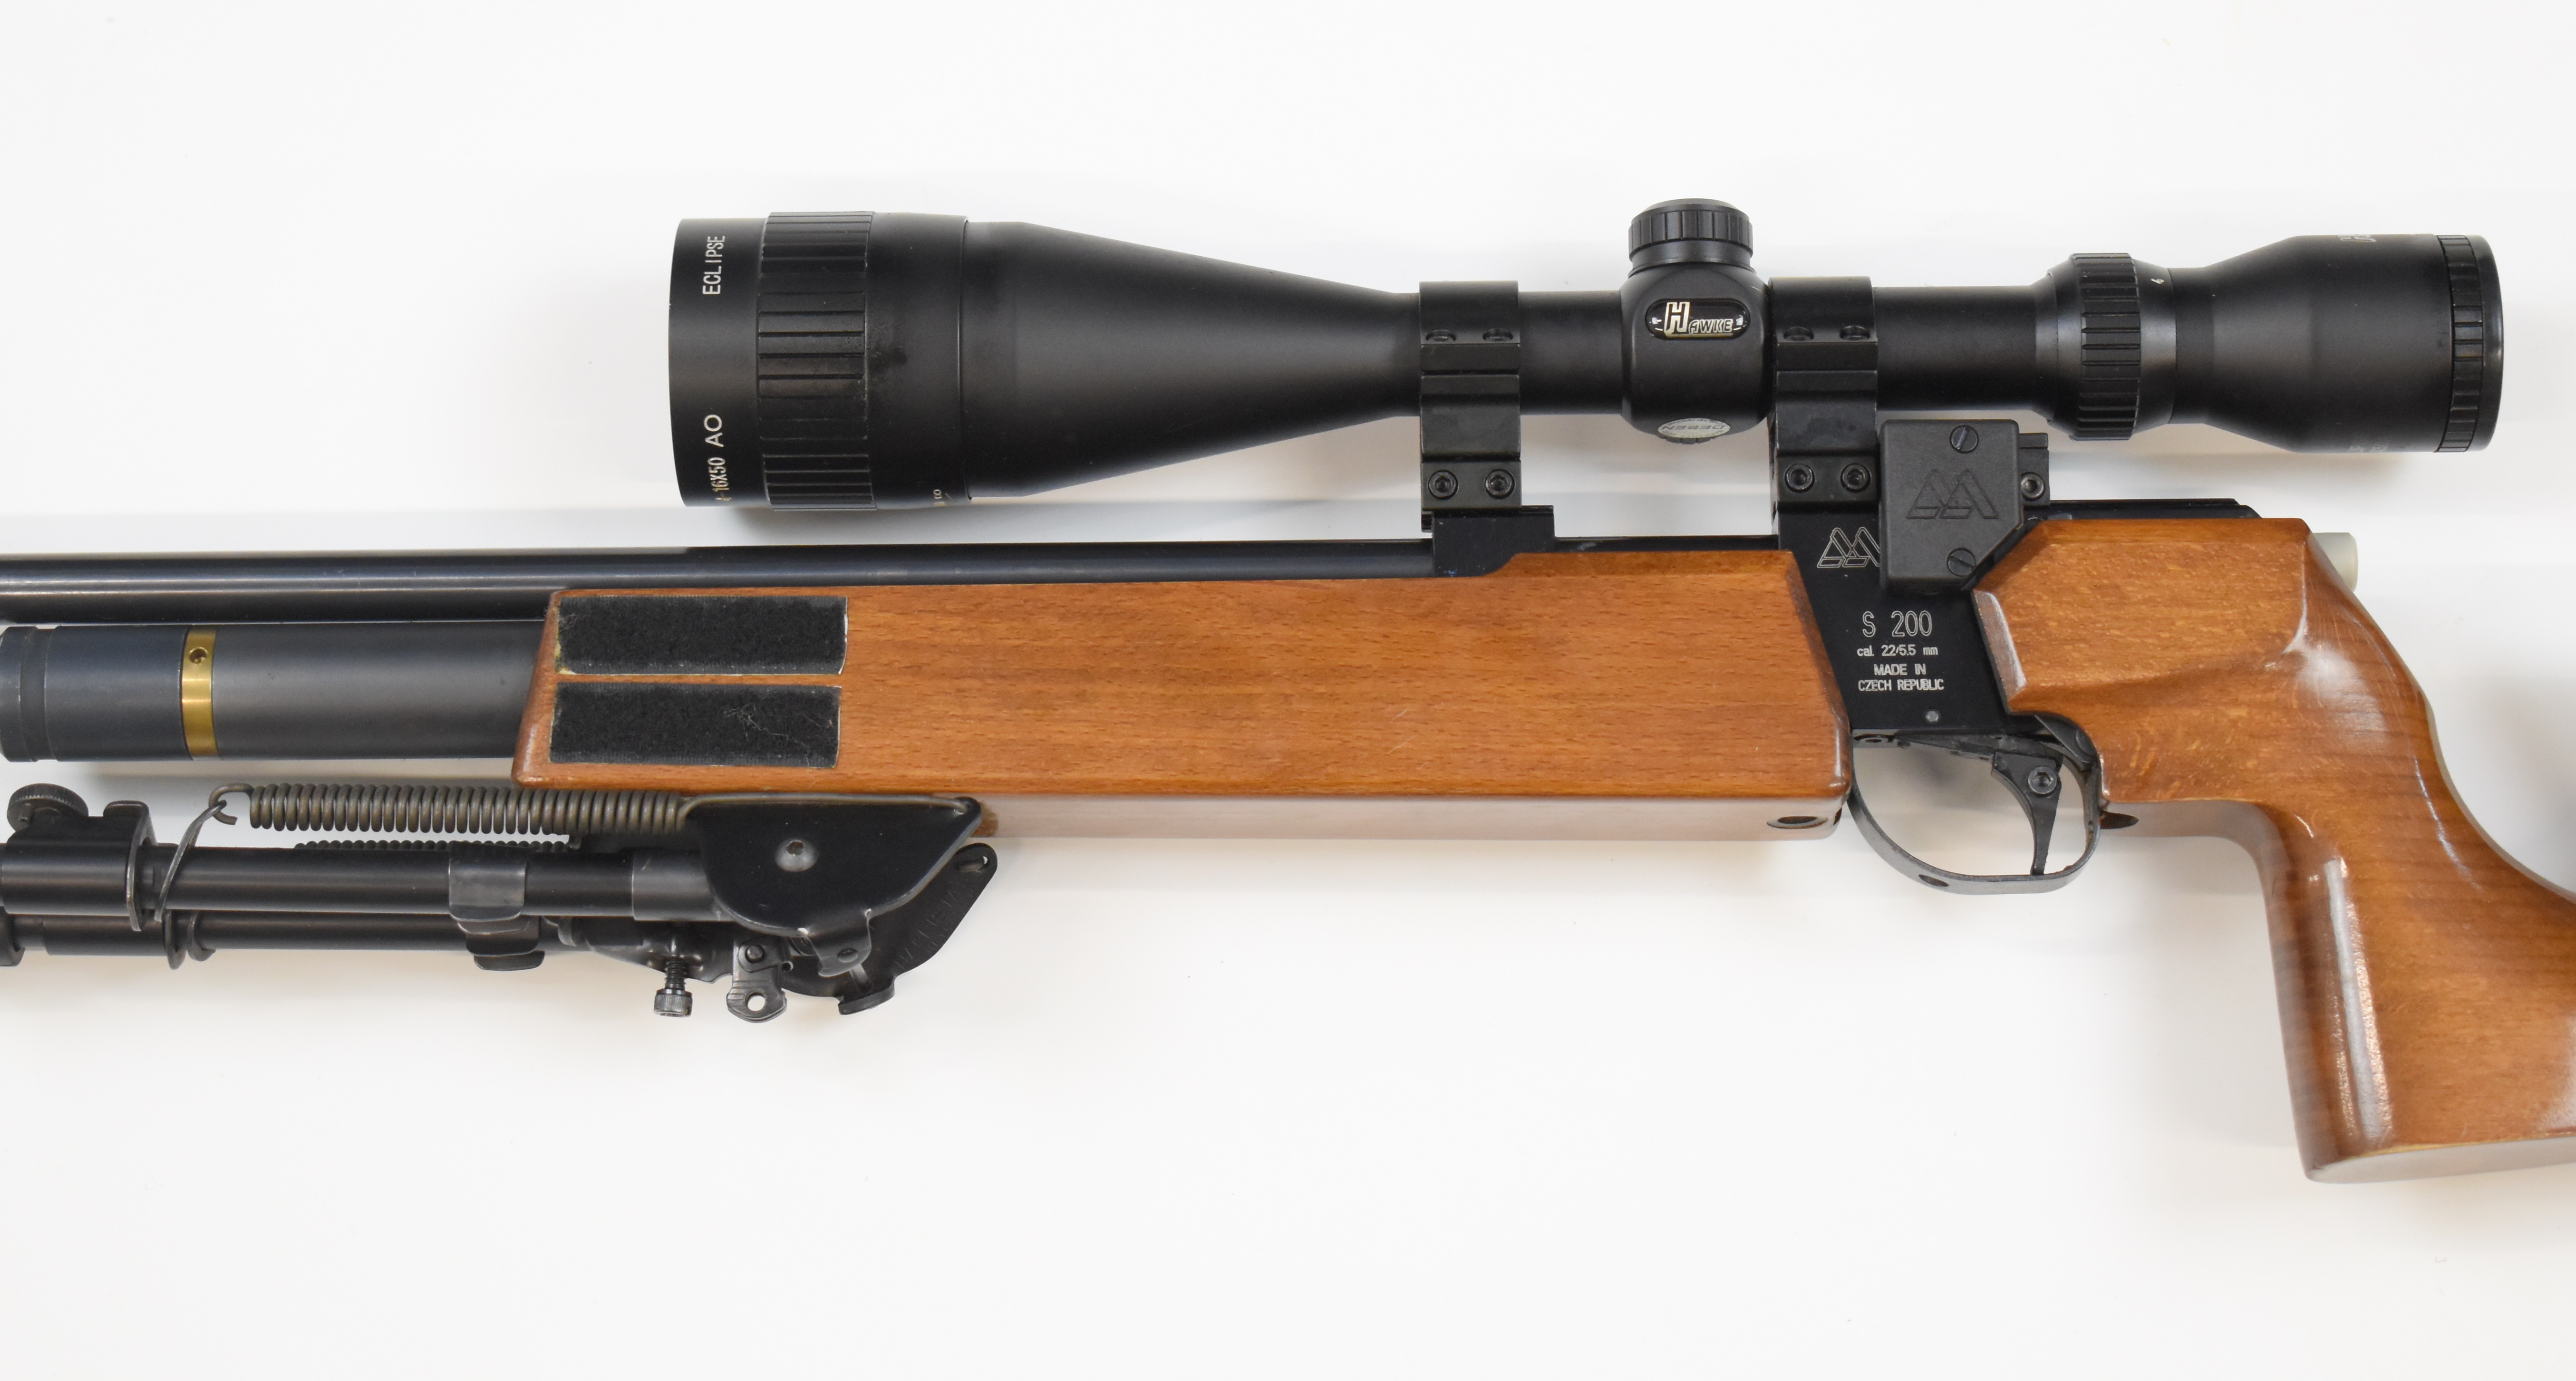 Air Arms S200 .22 PCP air rifle with 10-shot magazine, sound moderator, bi-pod, adjustable trigger - Image 8 of 9